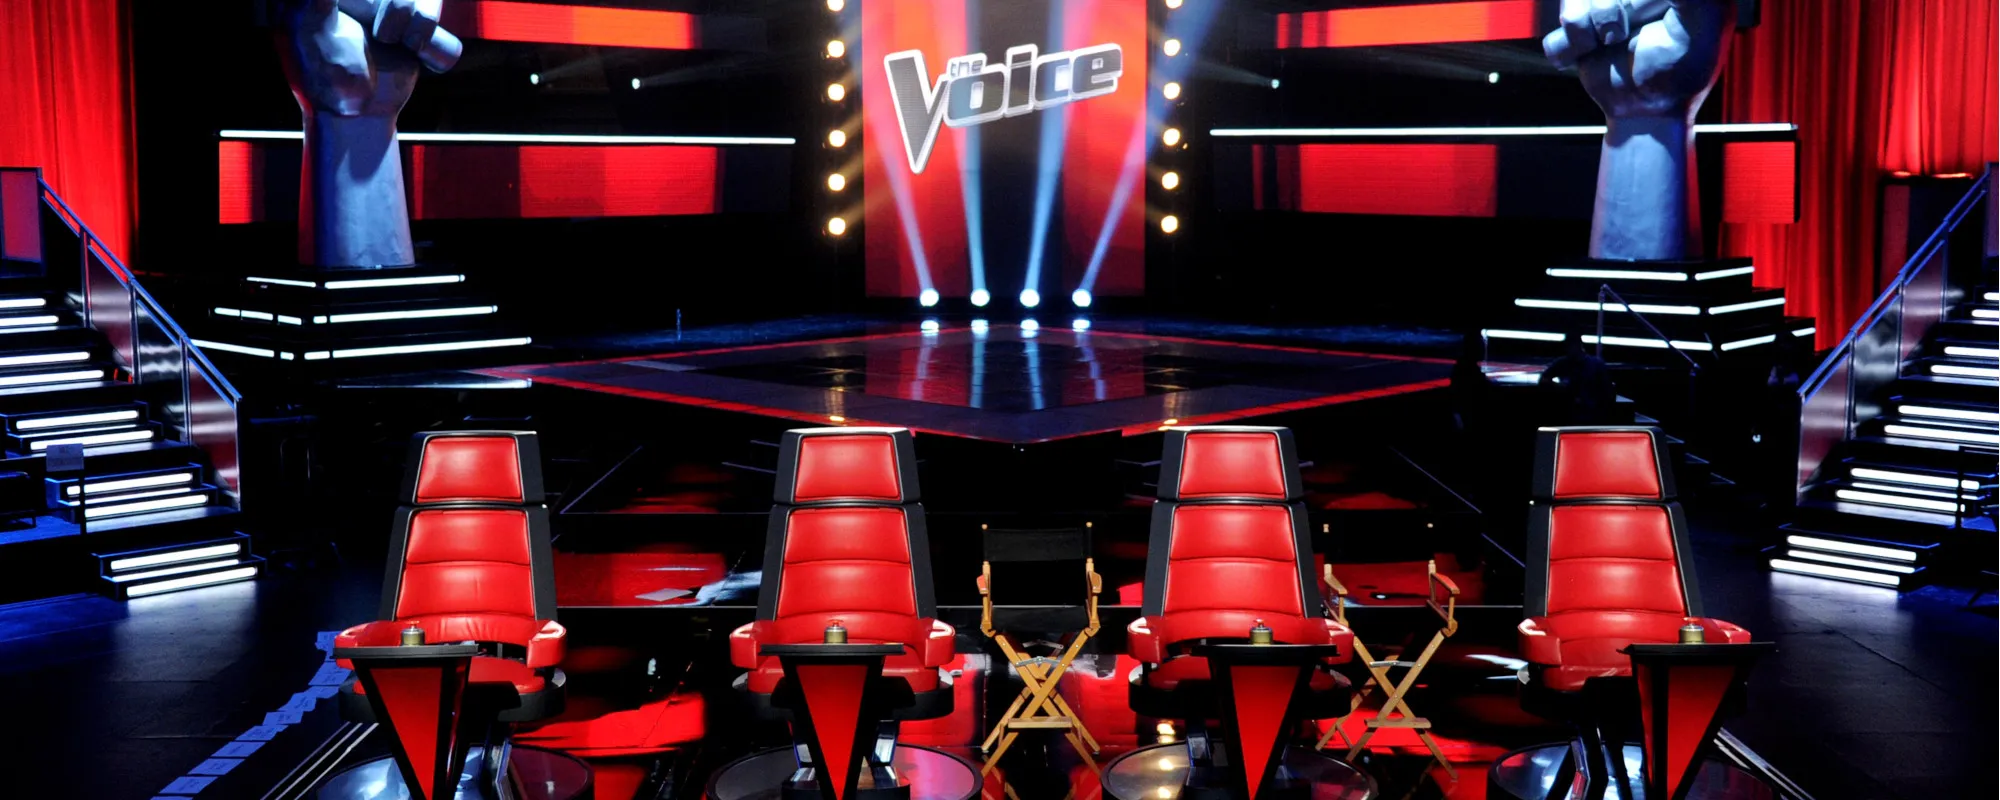 Is There a New Episode of ‘The Voice’ Tonight? How to Watch Season 25 Premiere